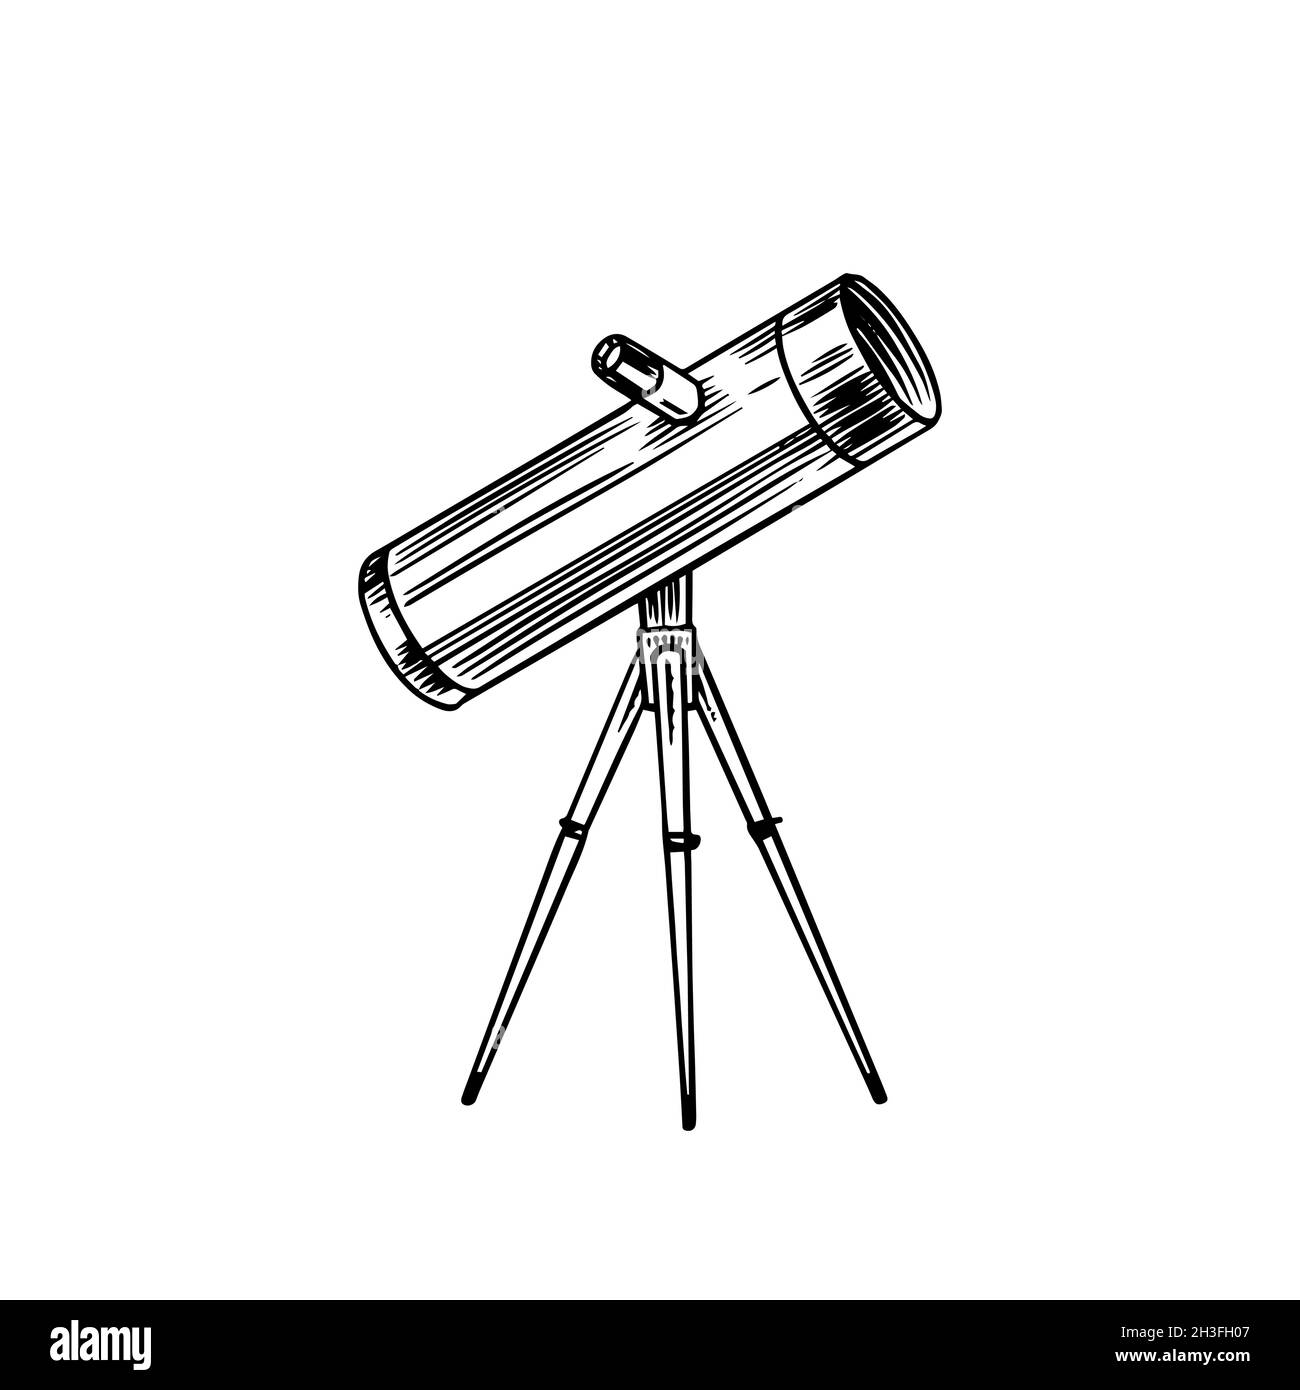 Telescope drawing Black and White Stock Photos & Images - Alamy